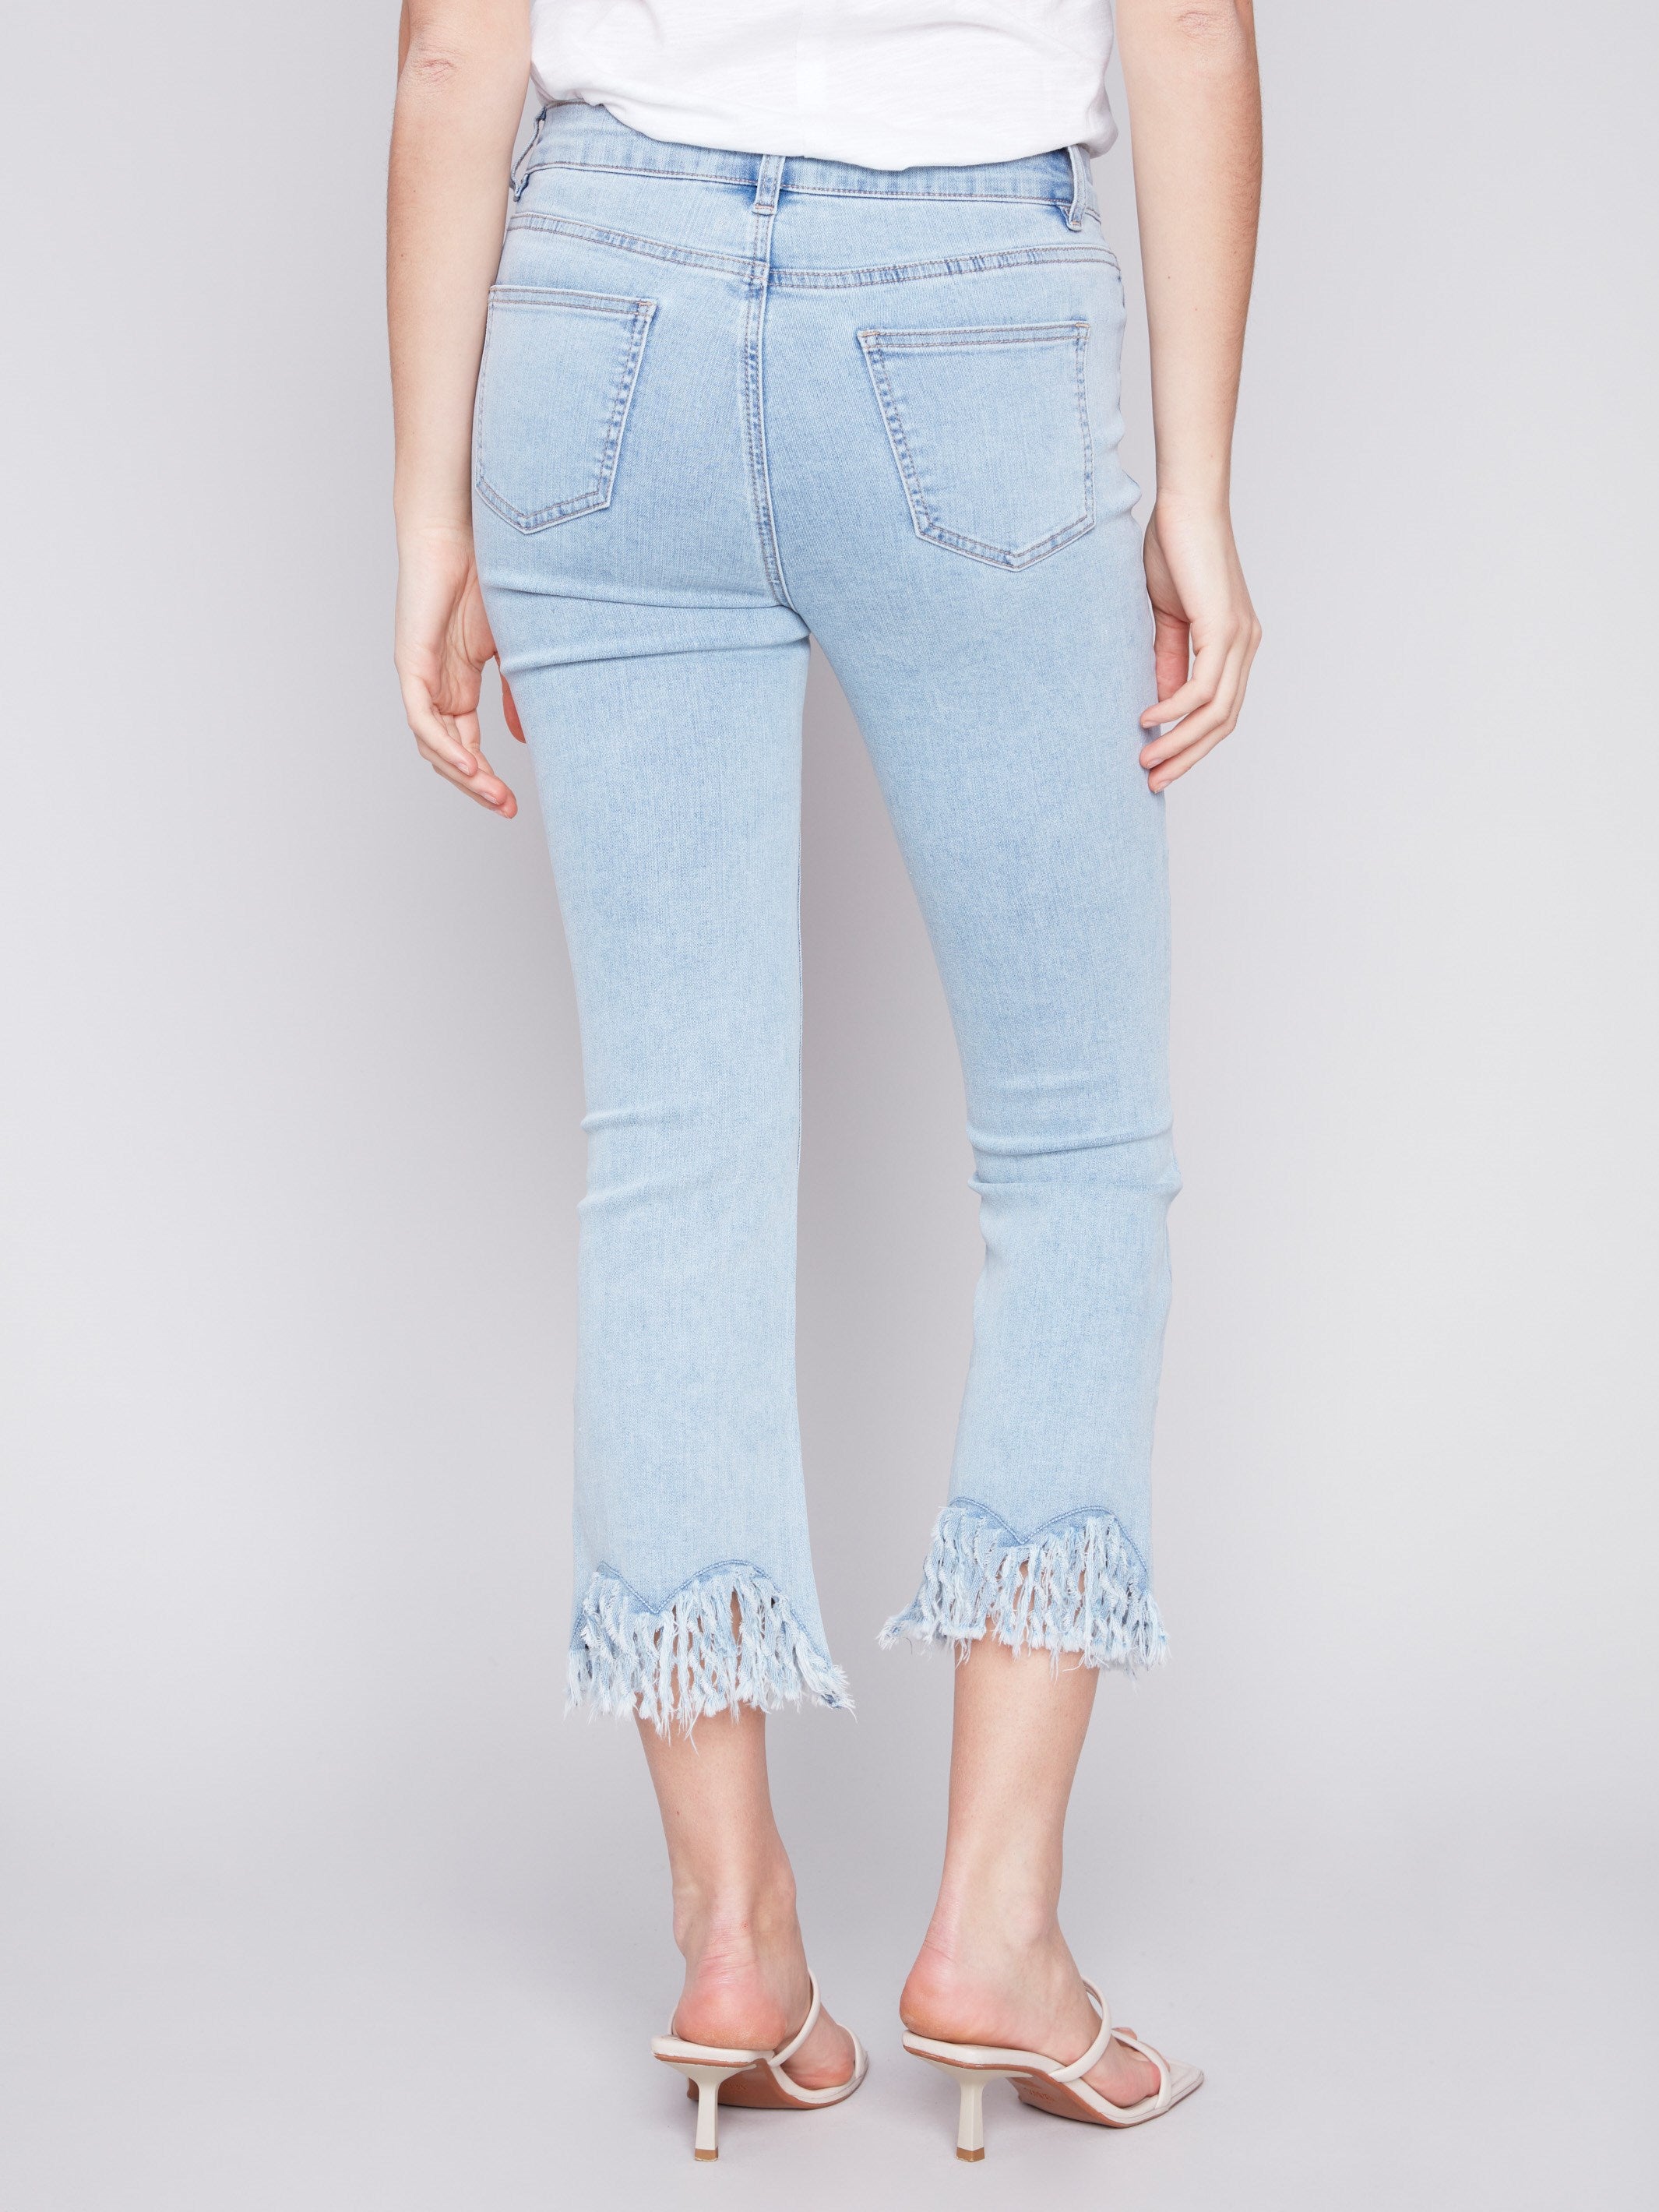 Charlie B Cropped Jeans with Fringed Hem - Bleach Blue - Image 3